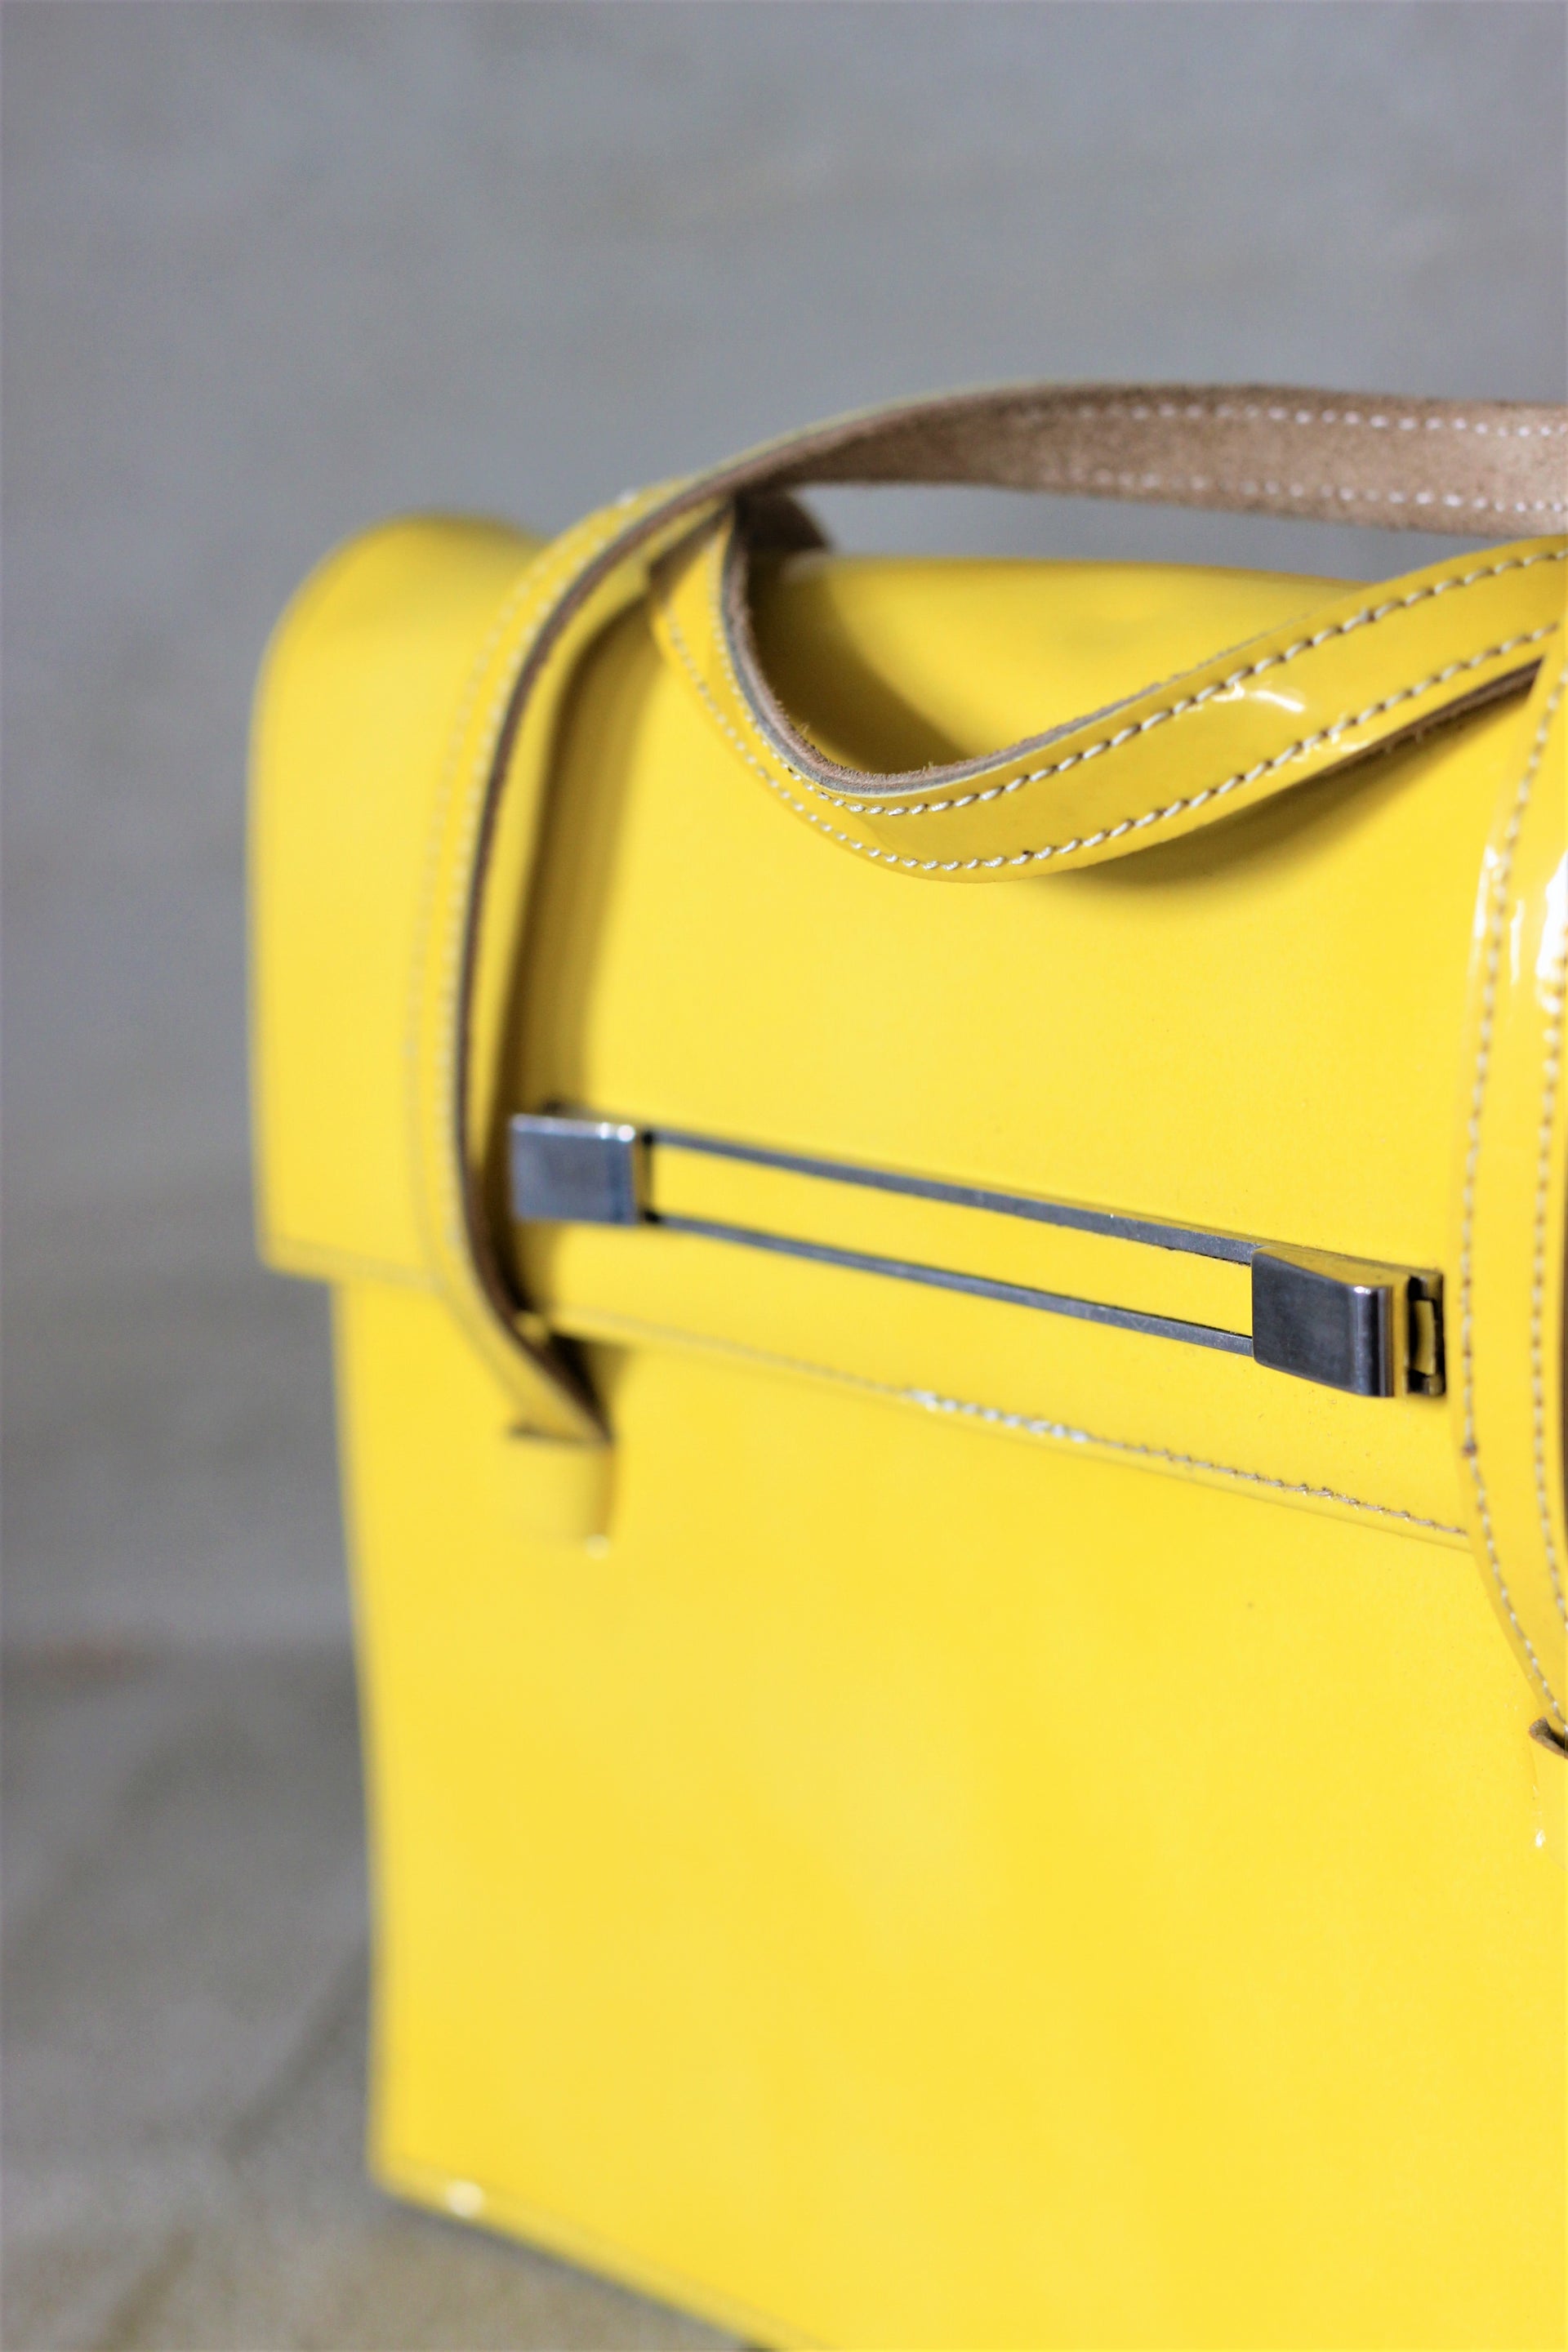 Vintage 1960's Top Handle Bag in a Rare Yellow